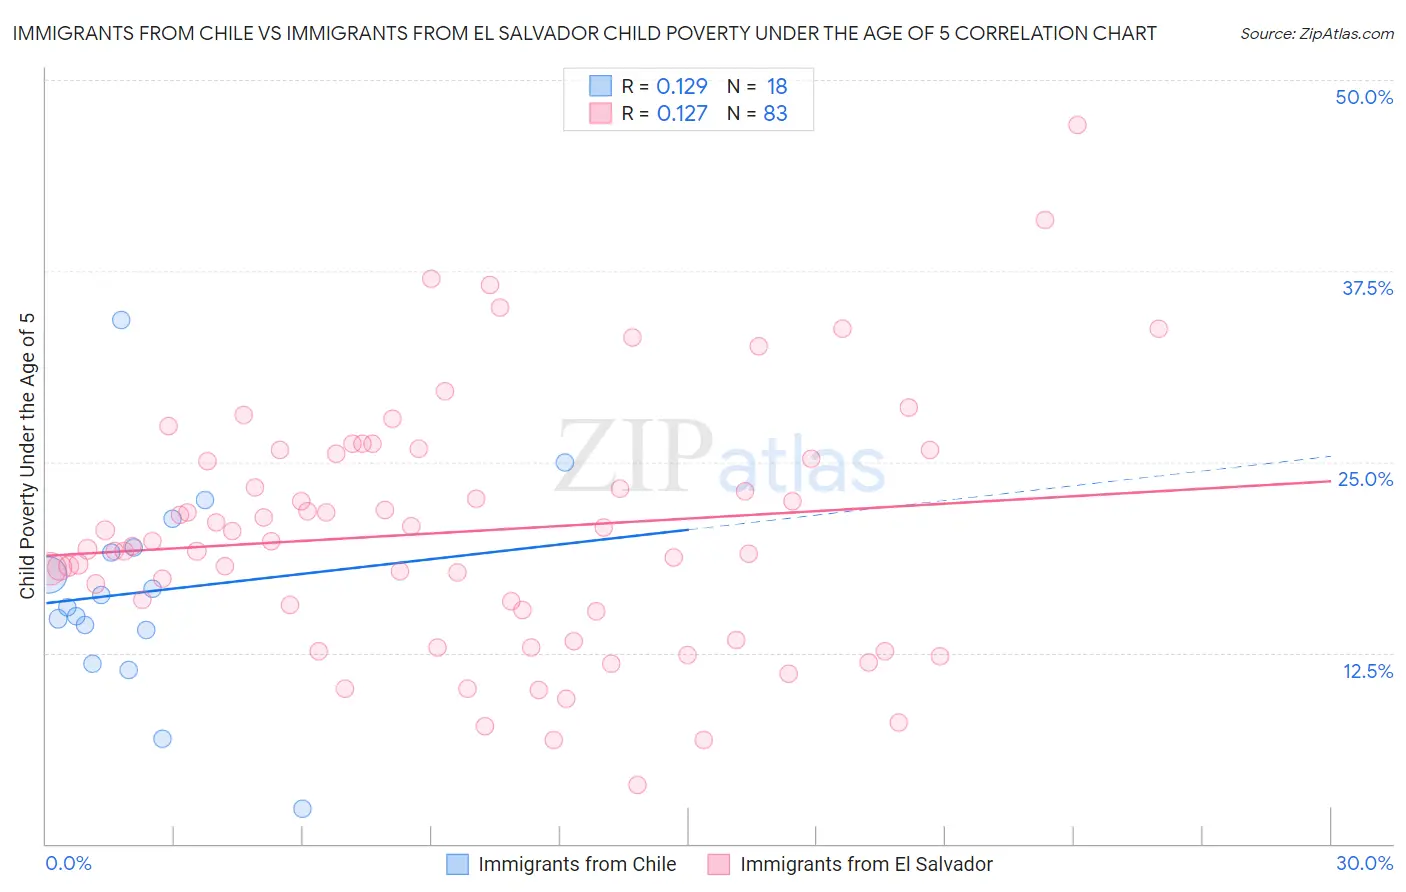 Immigrants from Chile vs Immigrants from El Salvador Child Poverty Under the Age of 5